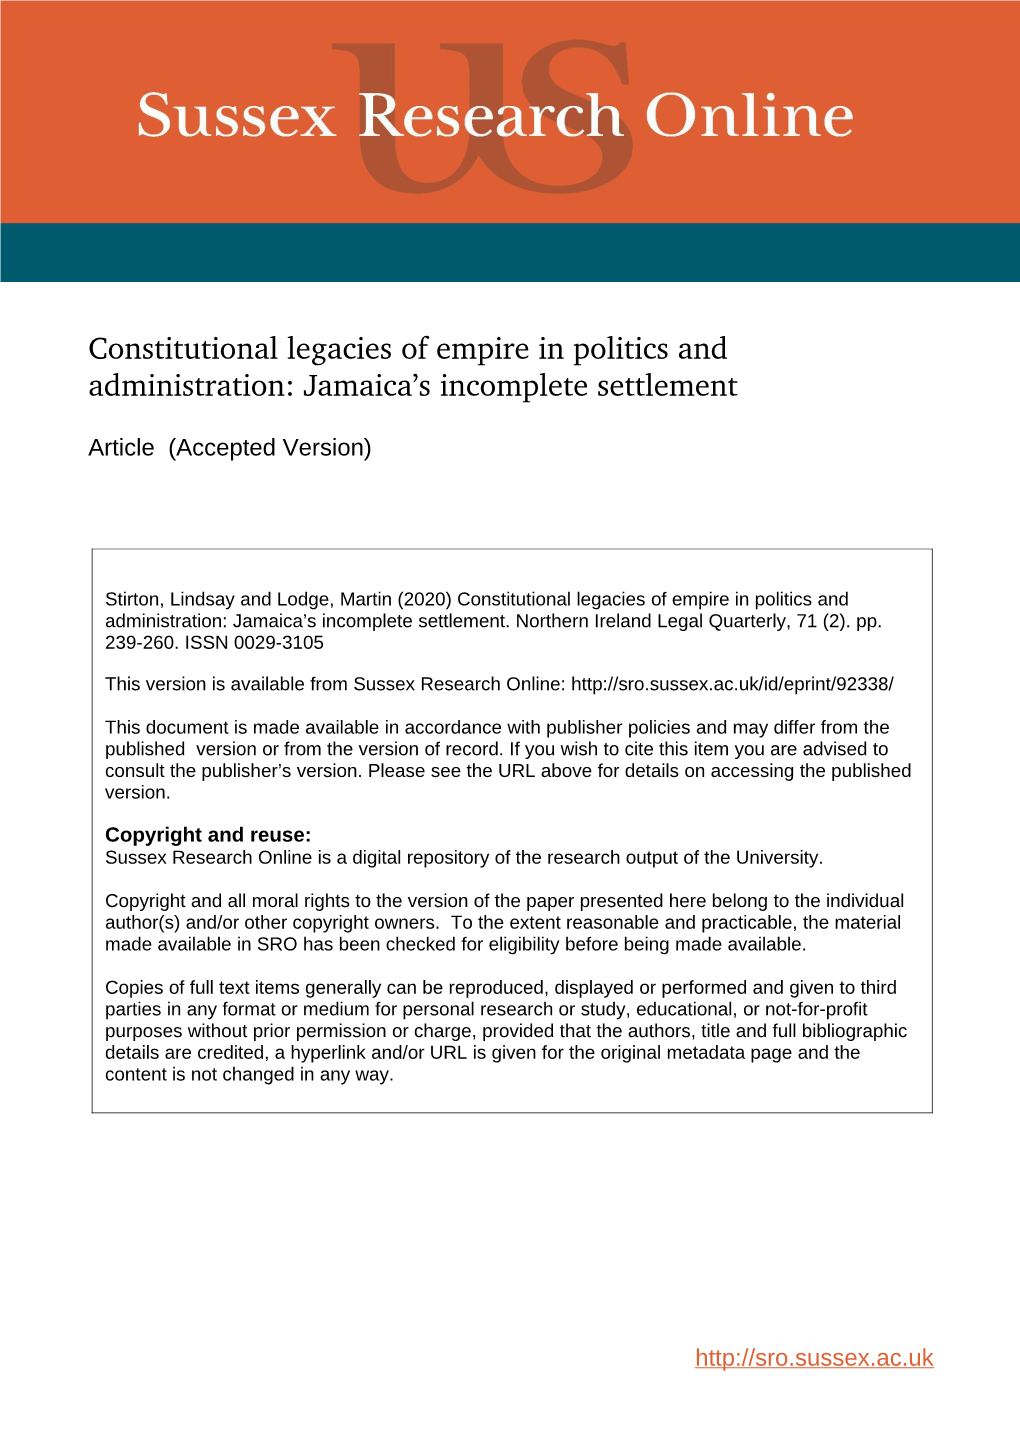 Constitutional Legacies of Empire in Politics and Administration: Jamaica’S Incomplete Settlement